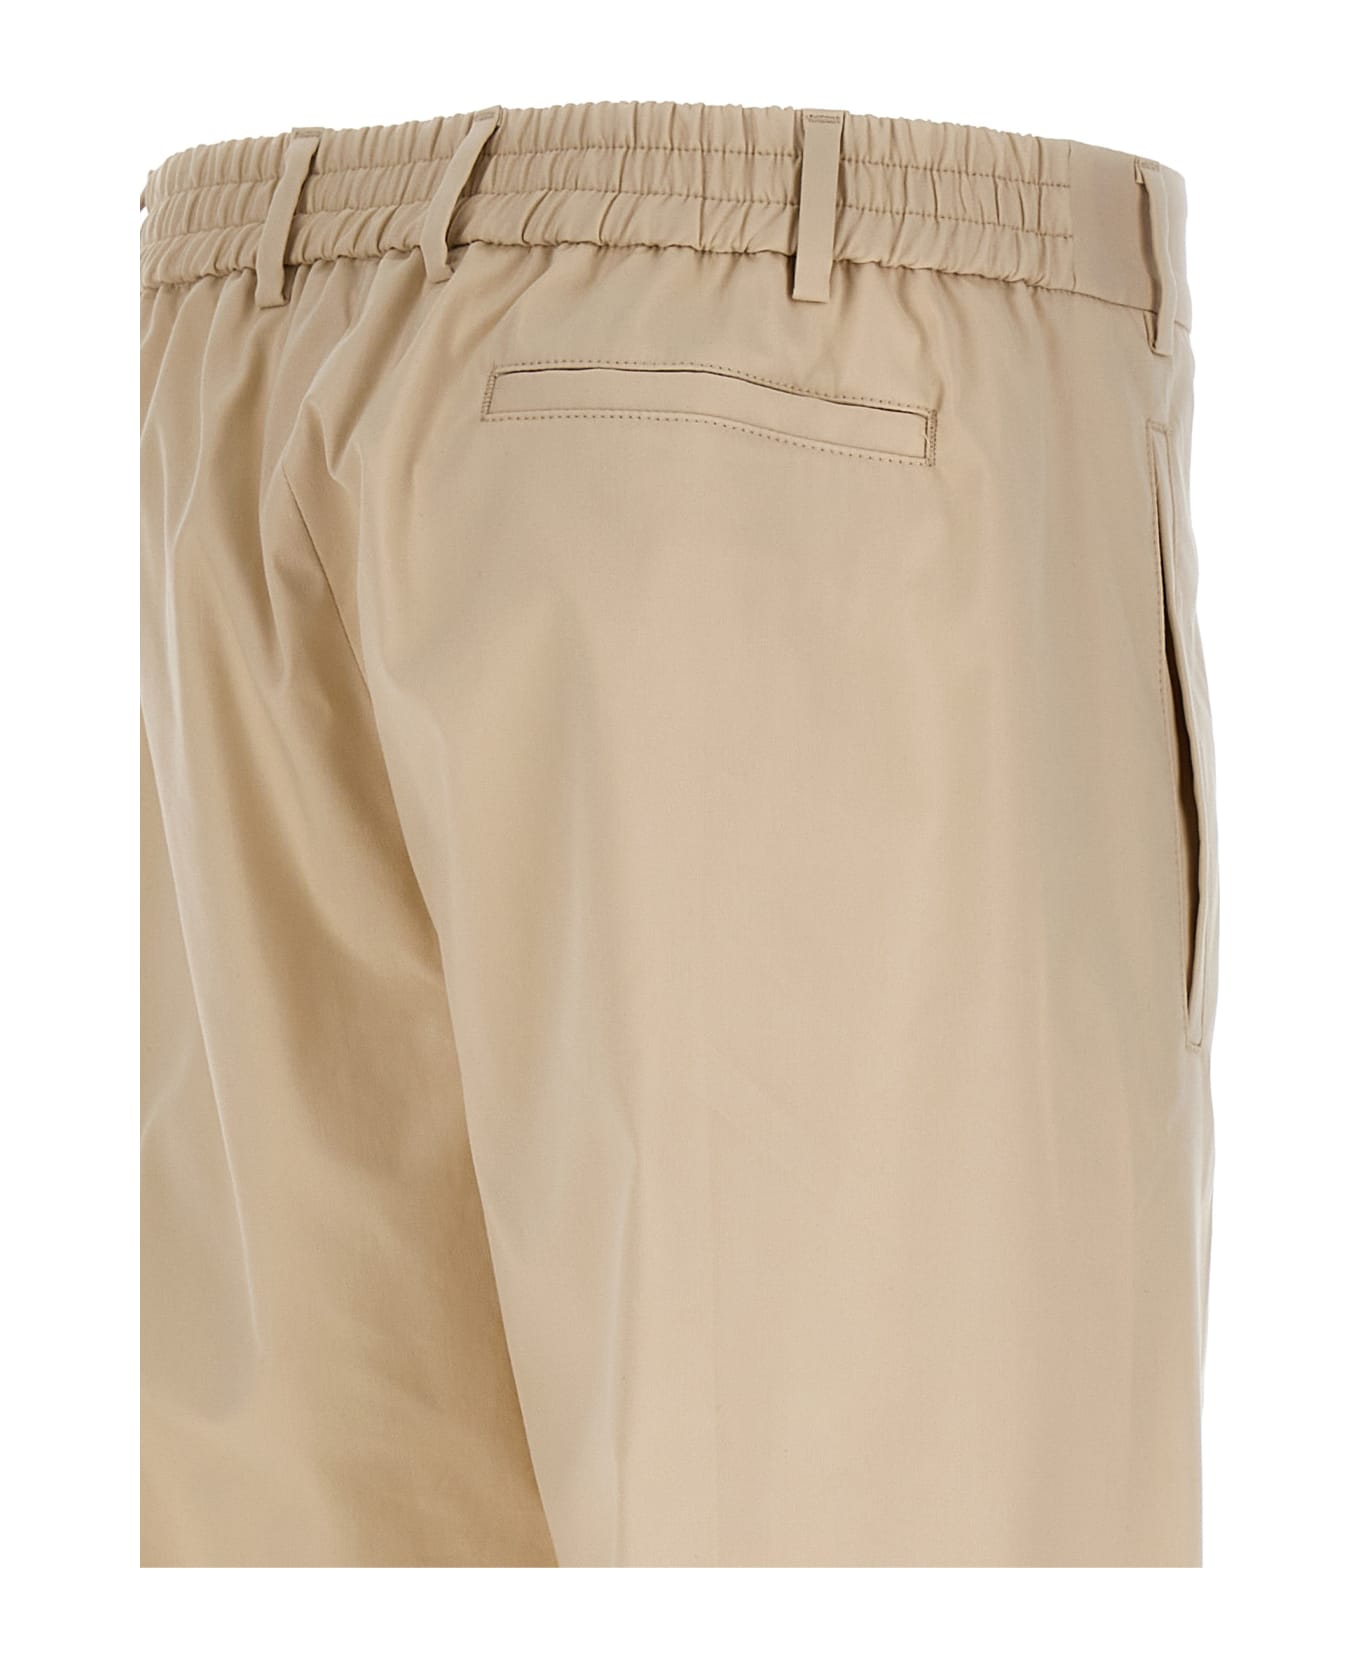 FourTwoFour on Fairfax Pants With Front Pleats - Beige ボトムス